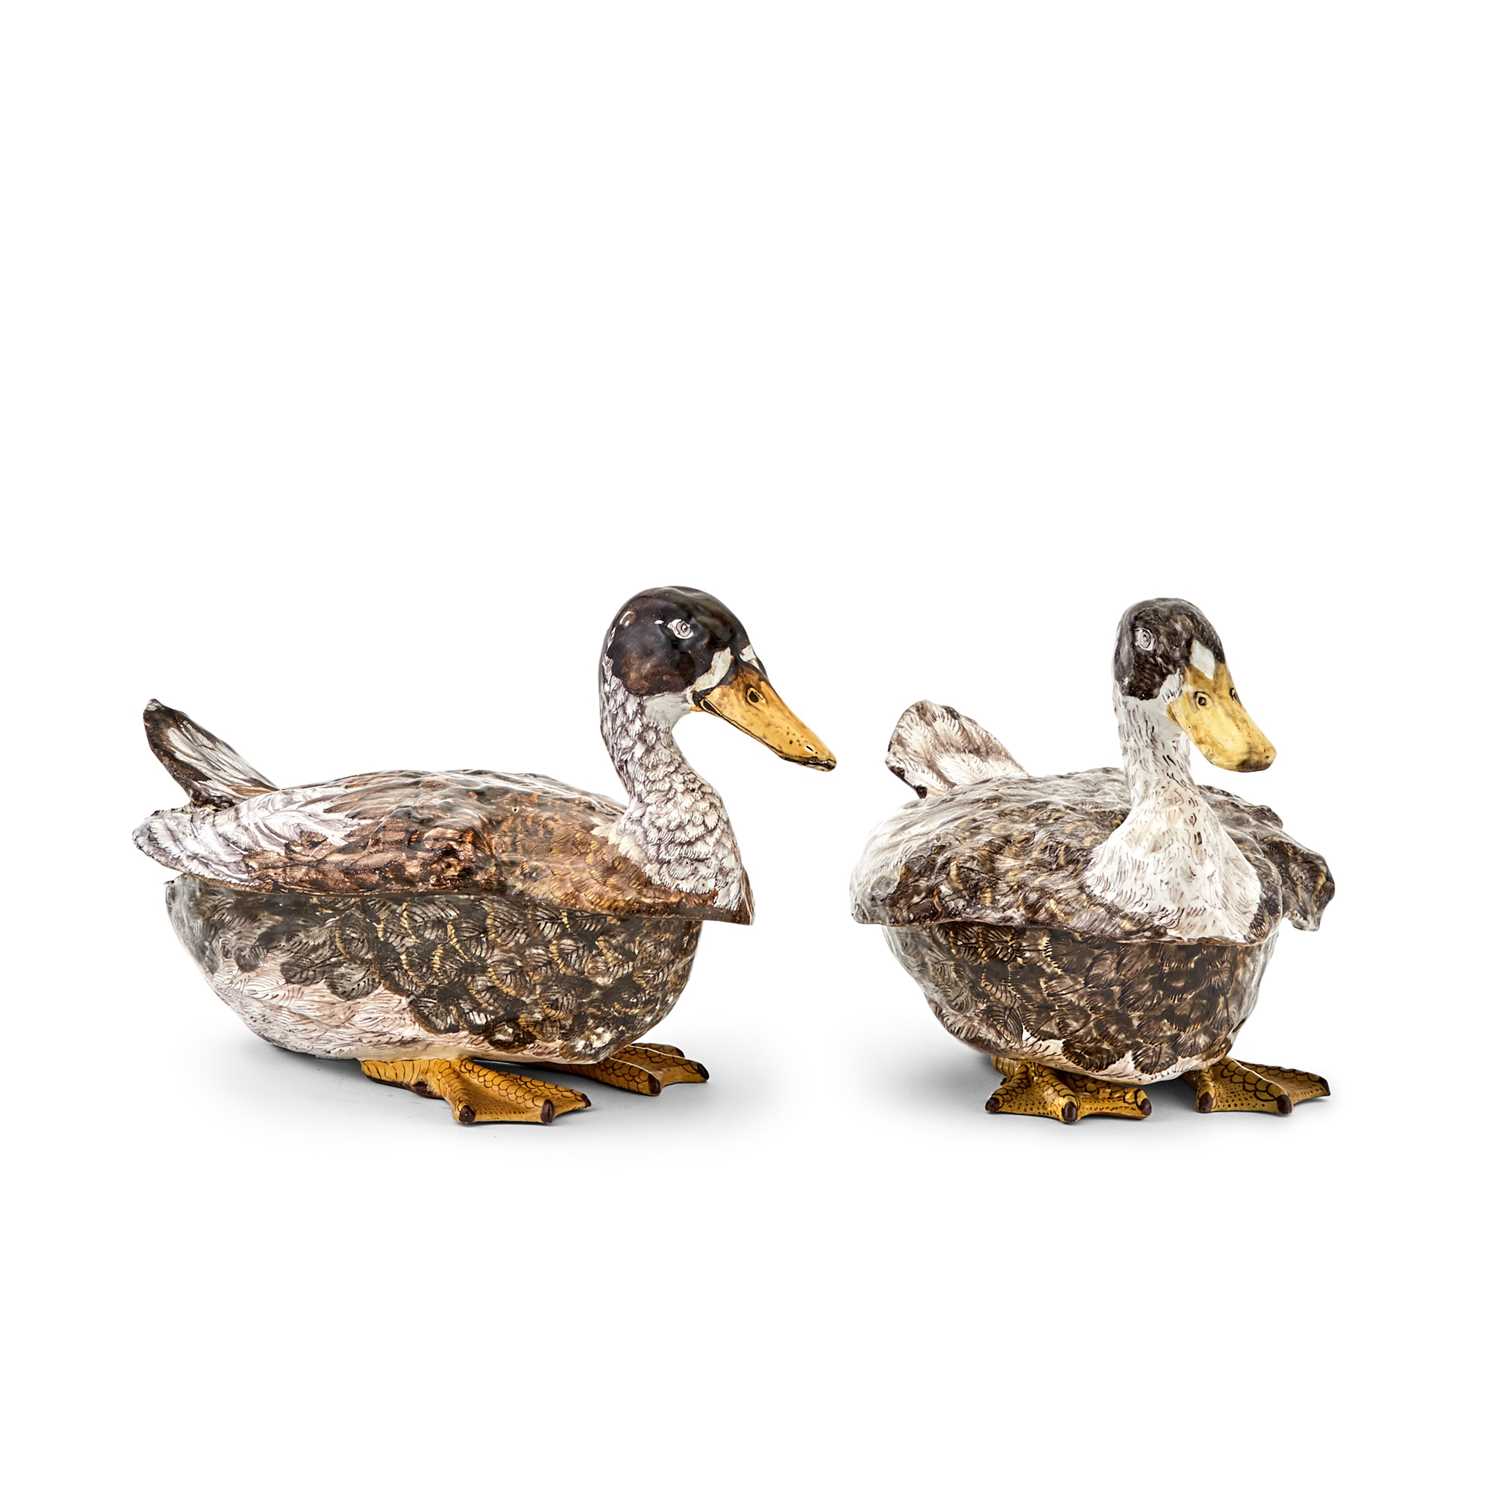 Lot 209 - Pair Of Marseille (Fauchier) Trompe L'oeil Duck Tureens and Covers